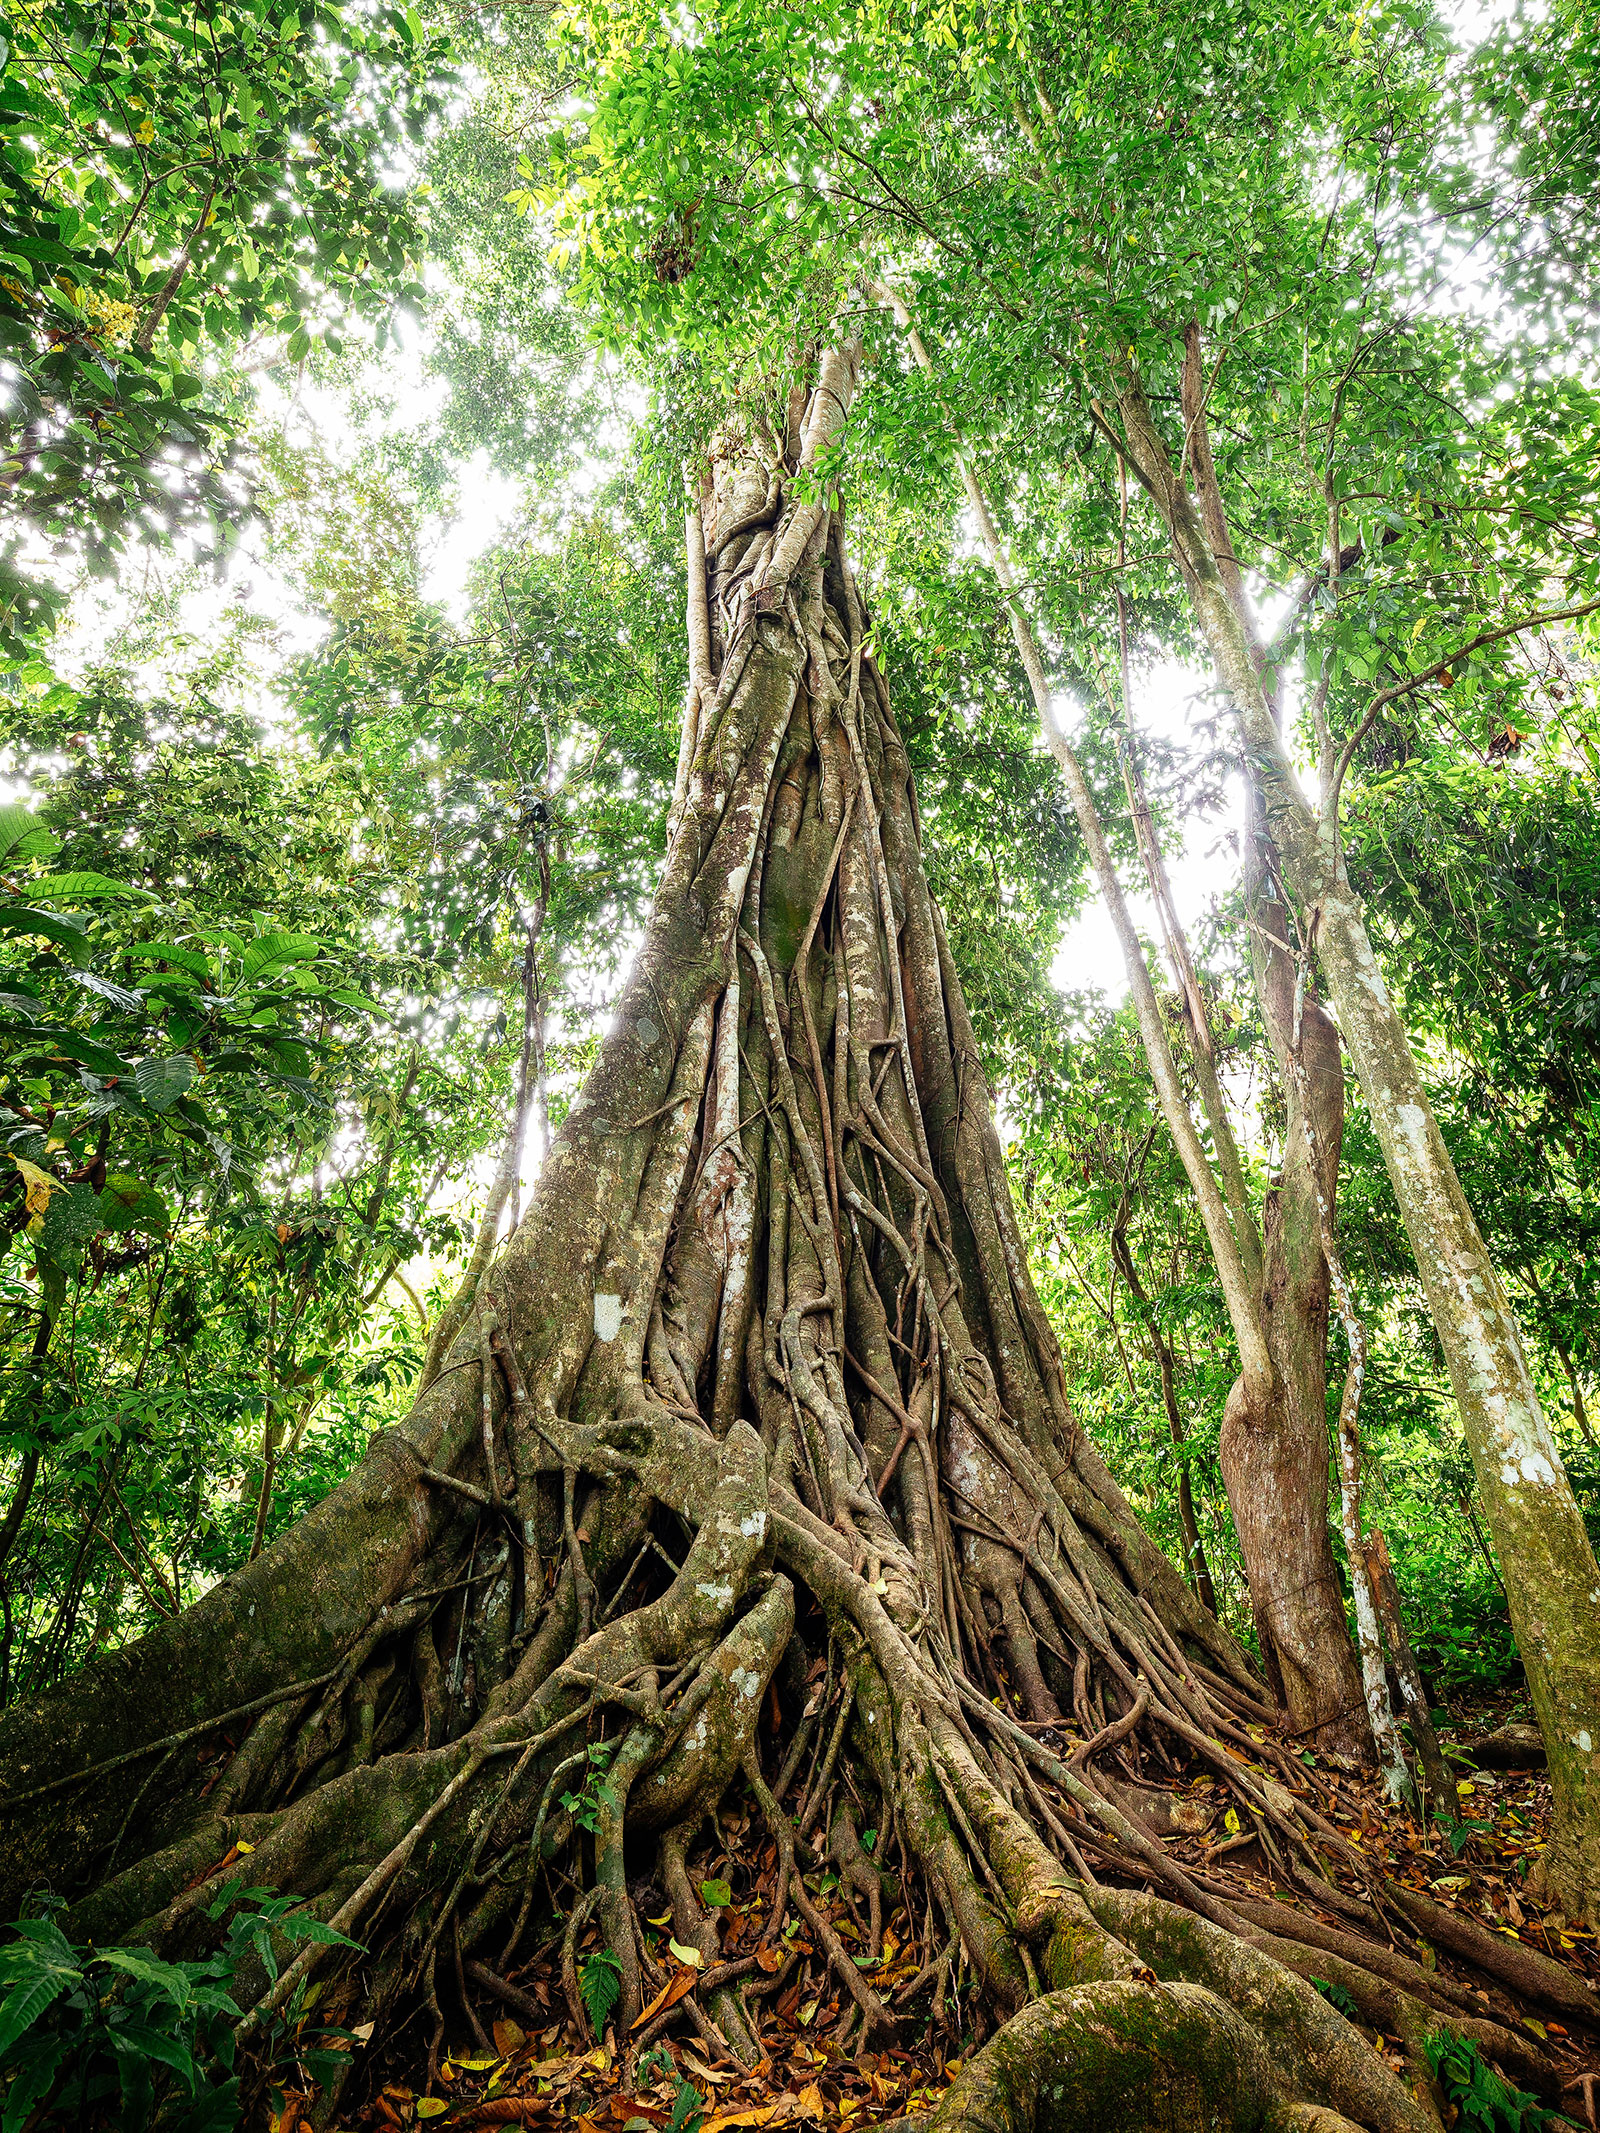 A towering Ficus altissima (council tree) in the wild with dozens of long roots draping down the trunk